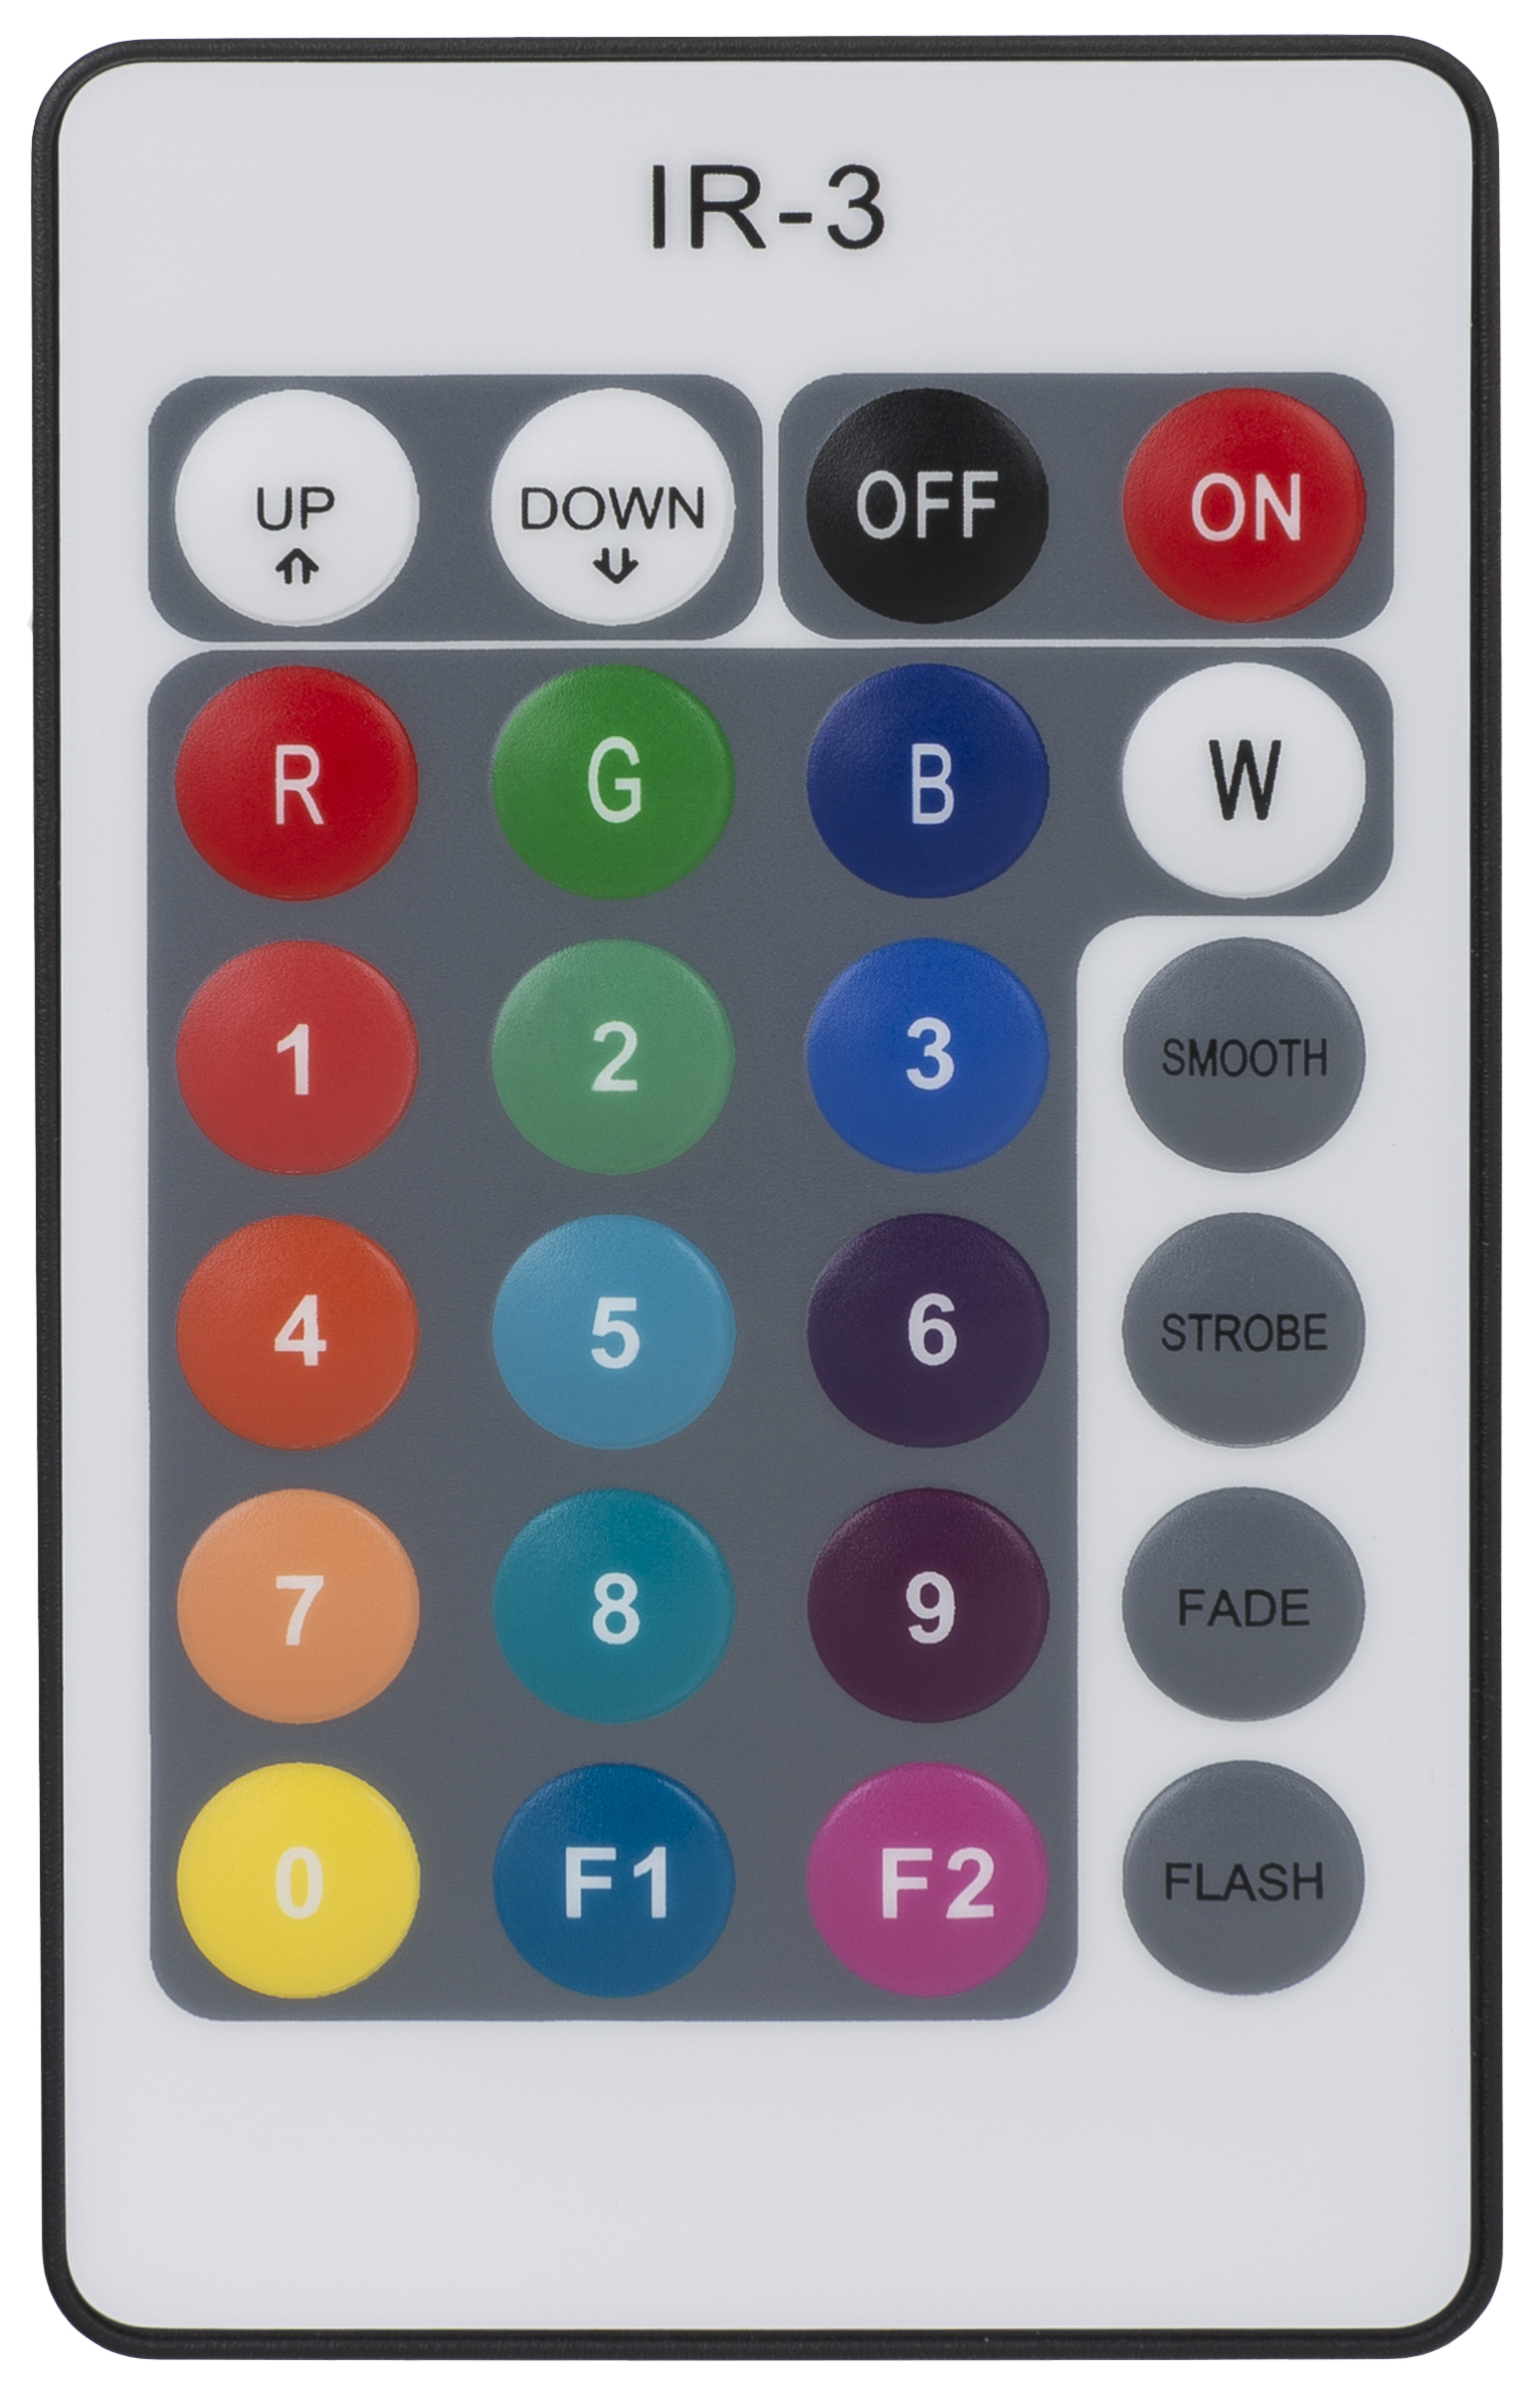 Infrared remote controller